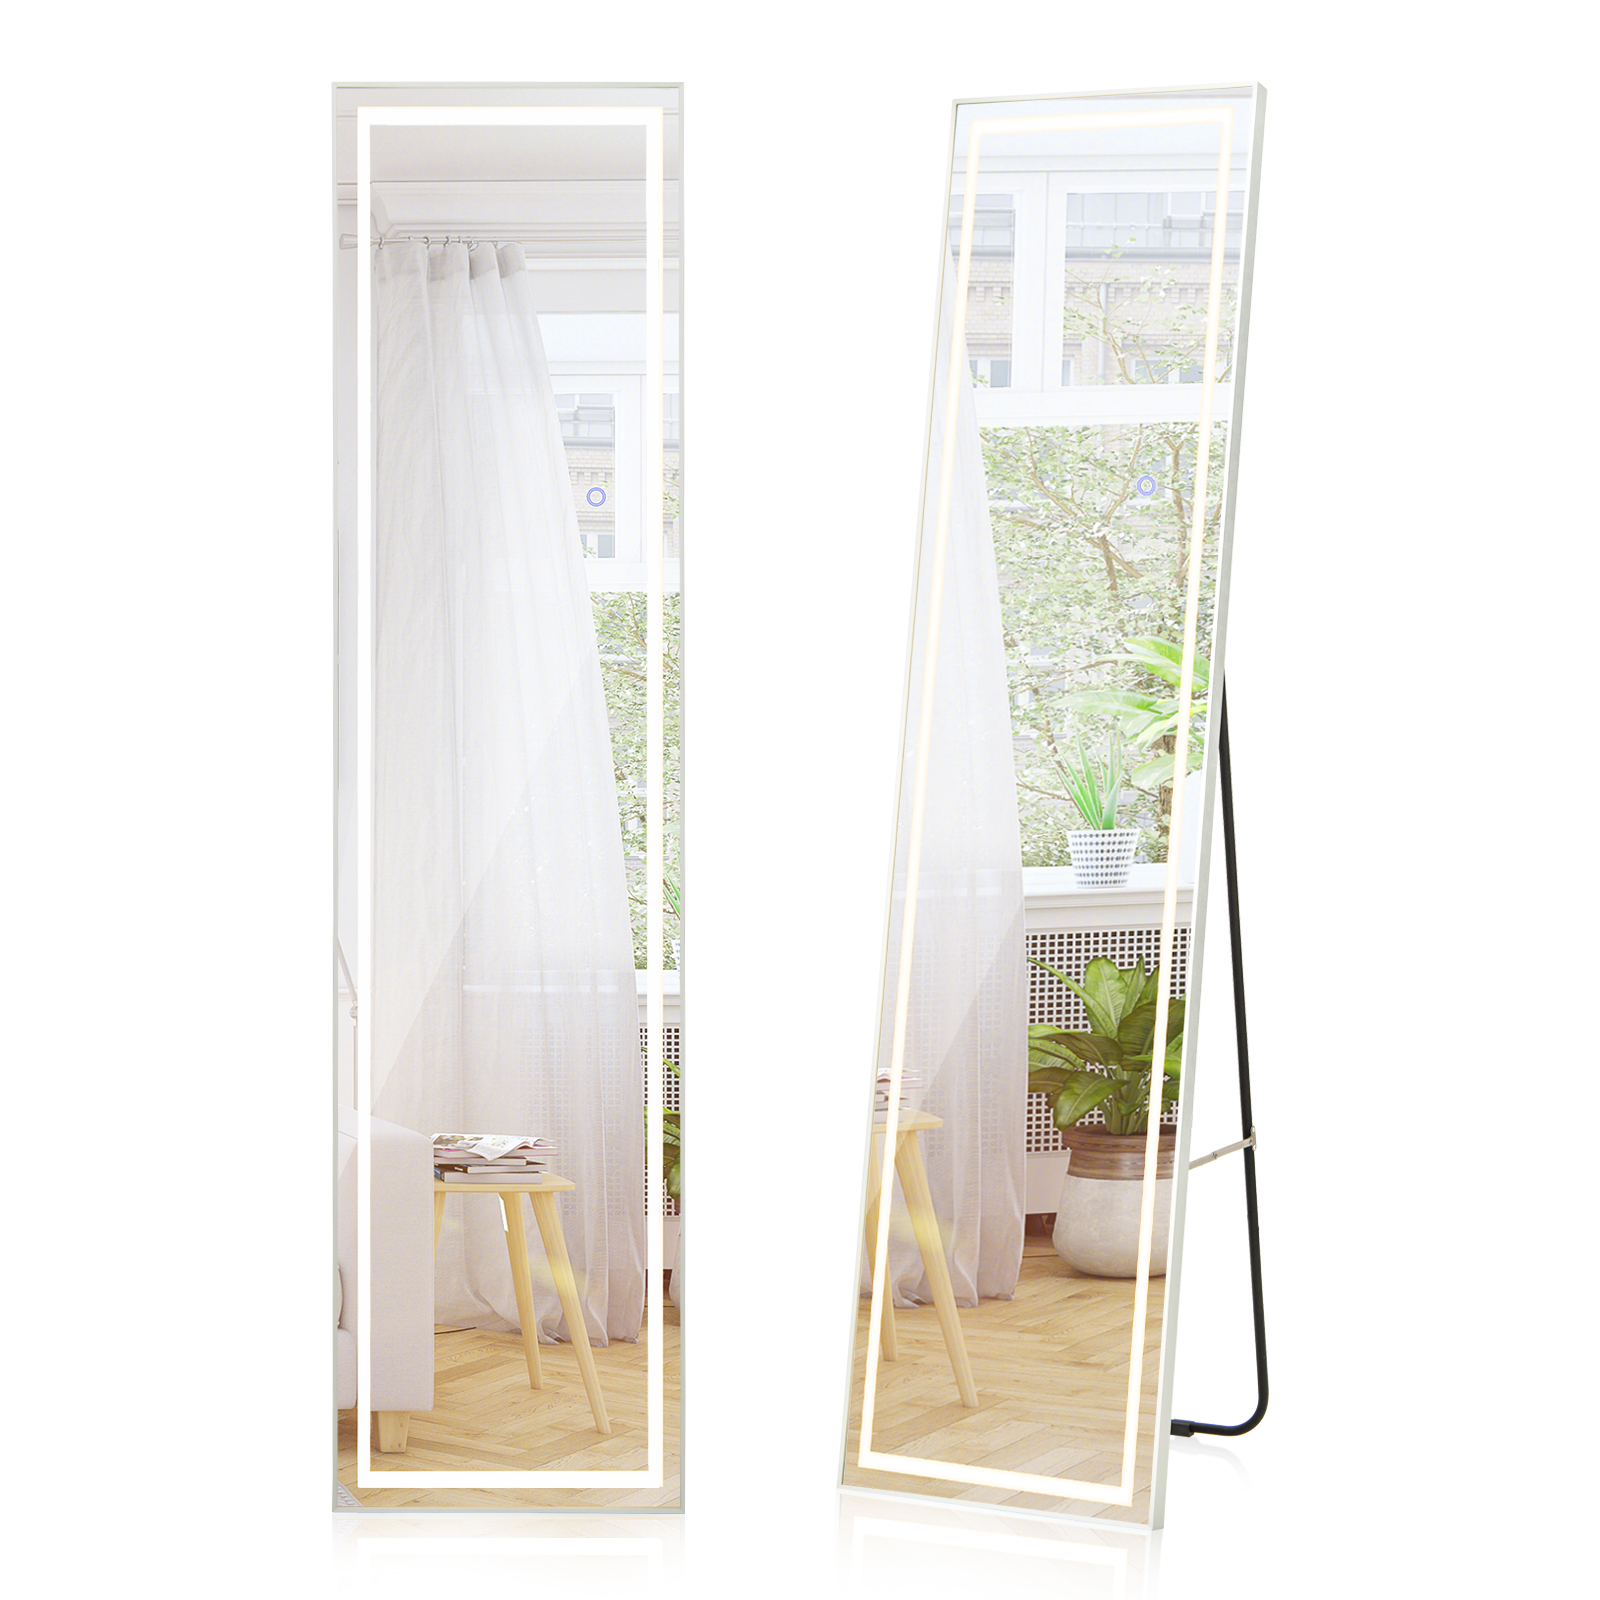 LED Lighted Full Length Mirror with Dimming and 3 Color Lighting-White